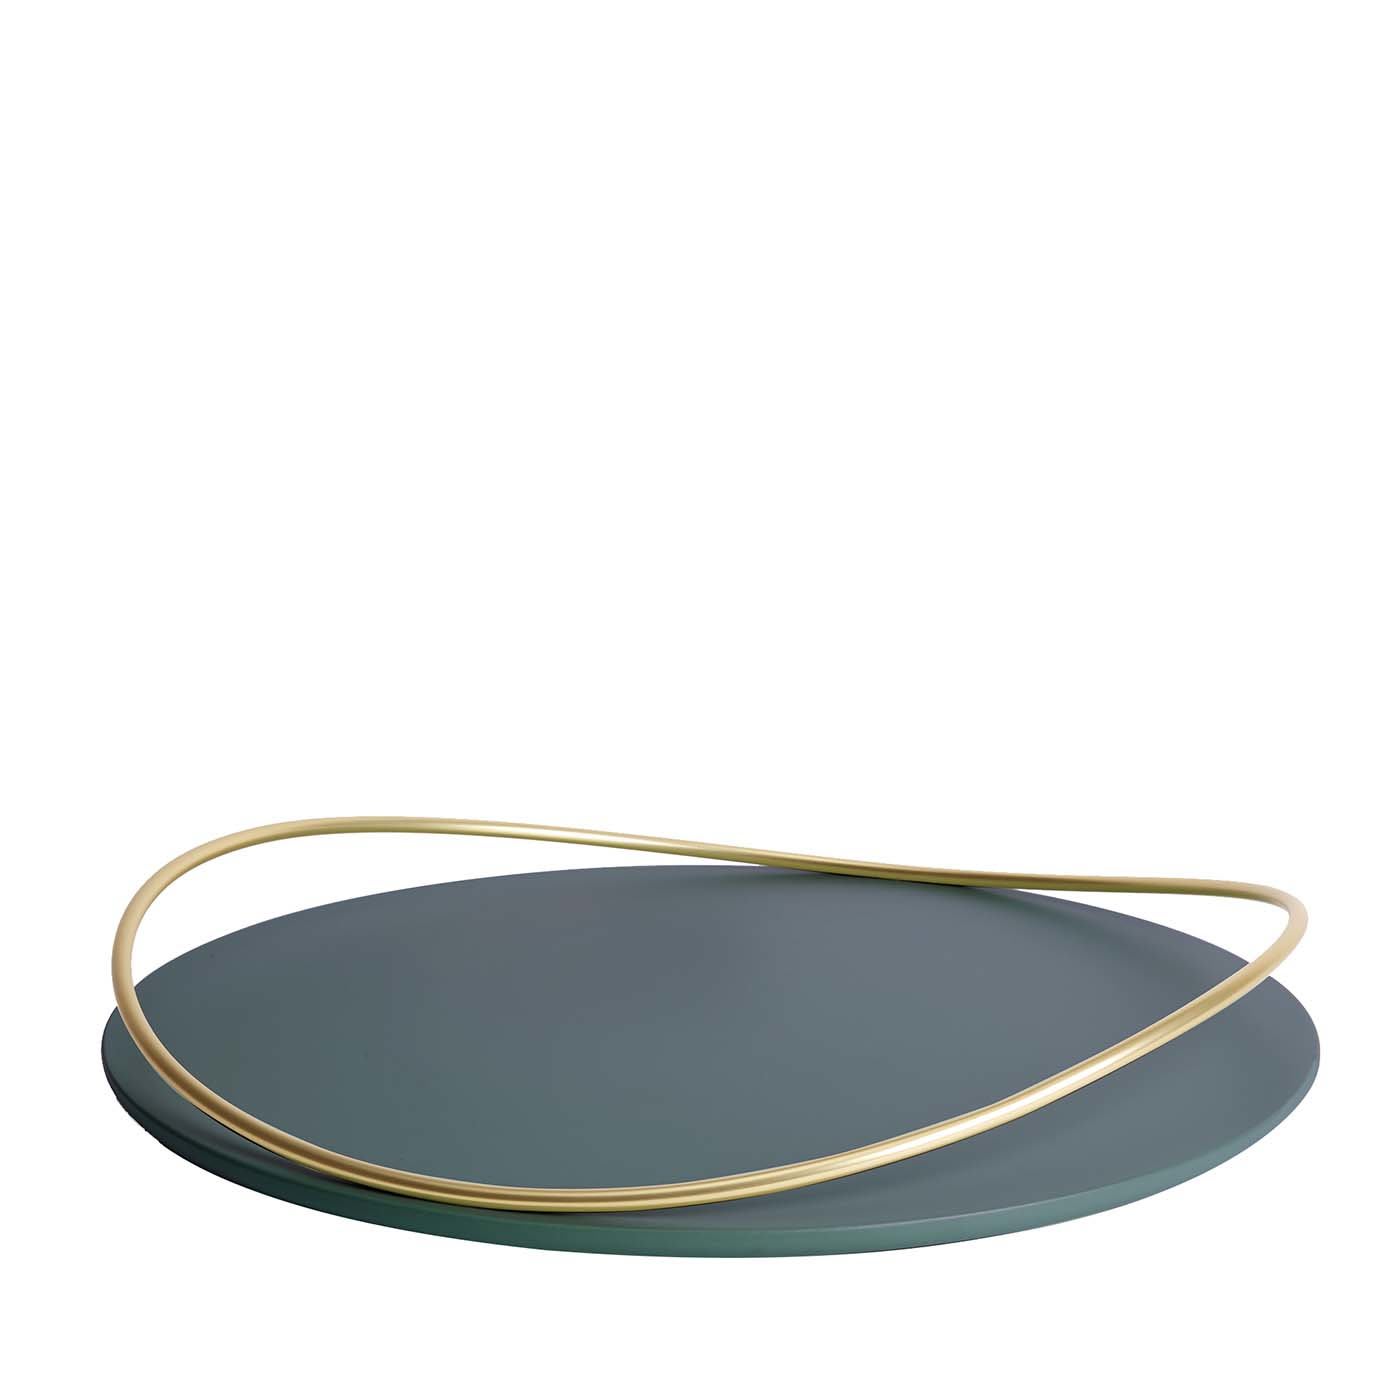 Large Round Touchè E Tray in Green - Mason Editions